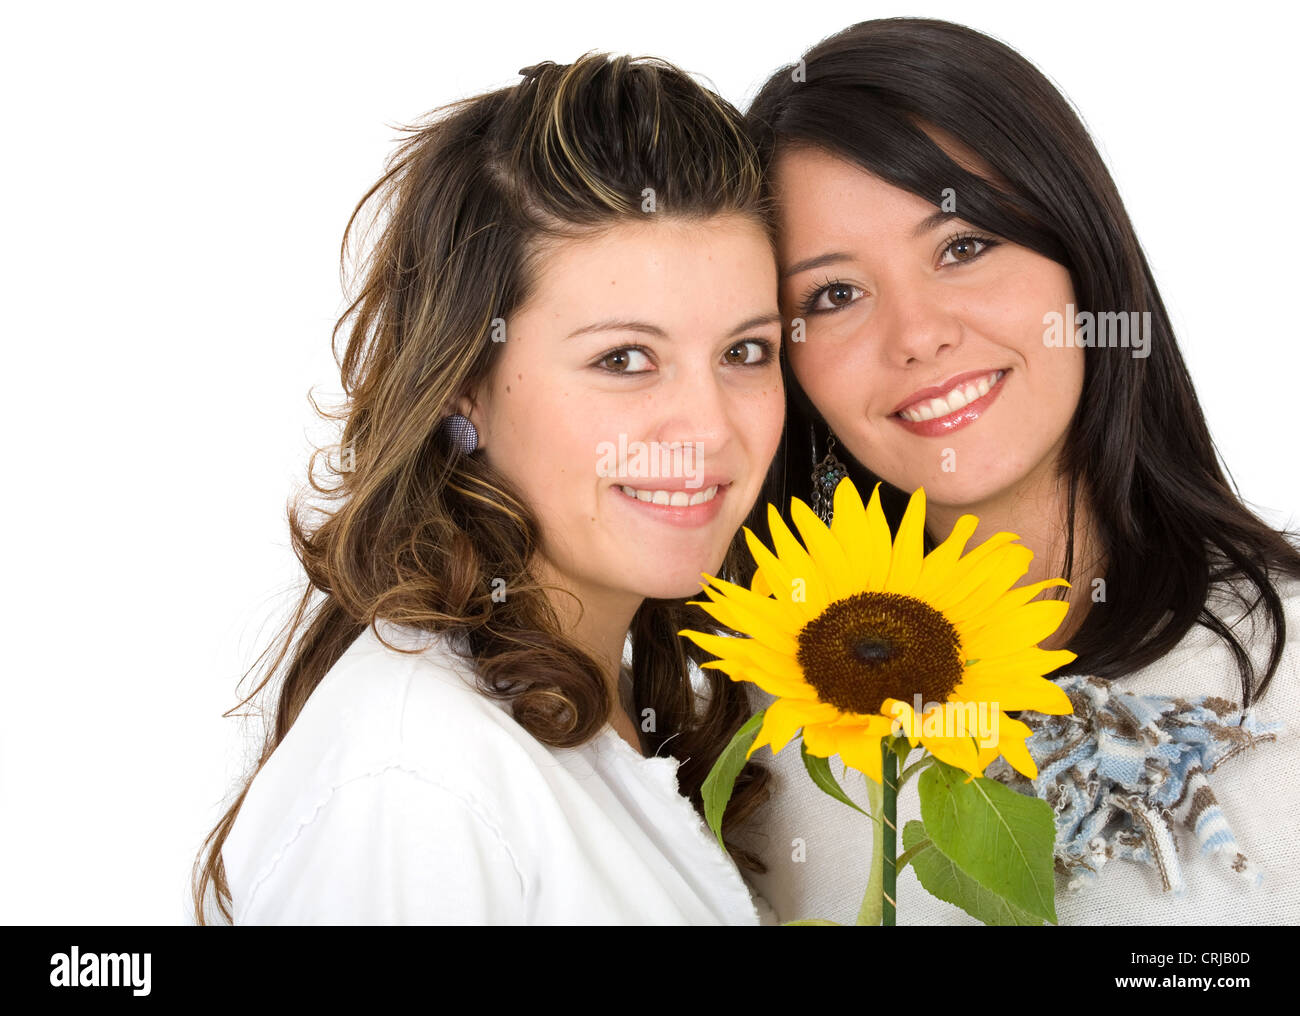 beautiful sisters portrait with a sunflower Stock Photo